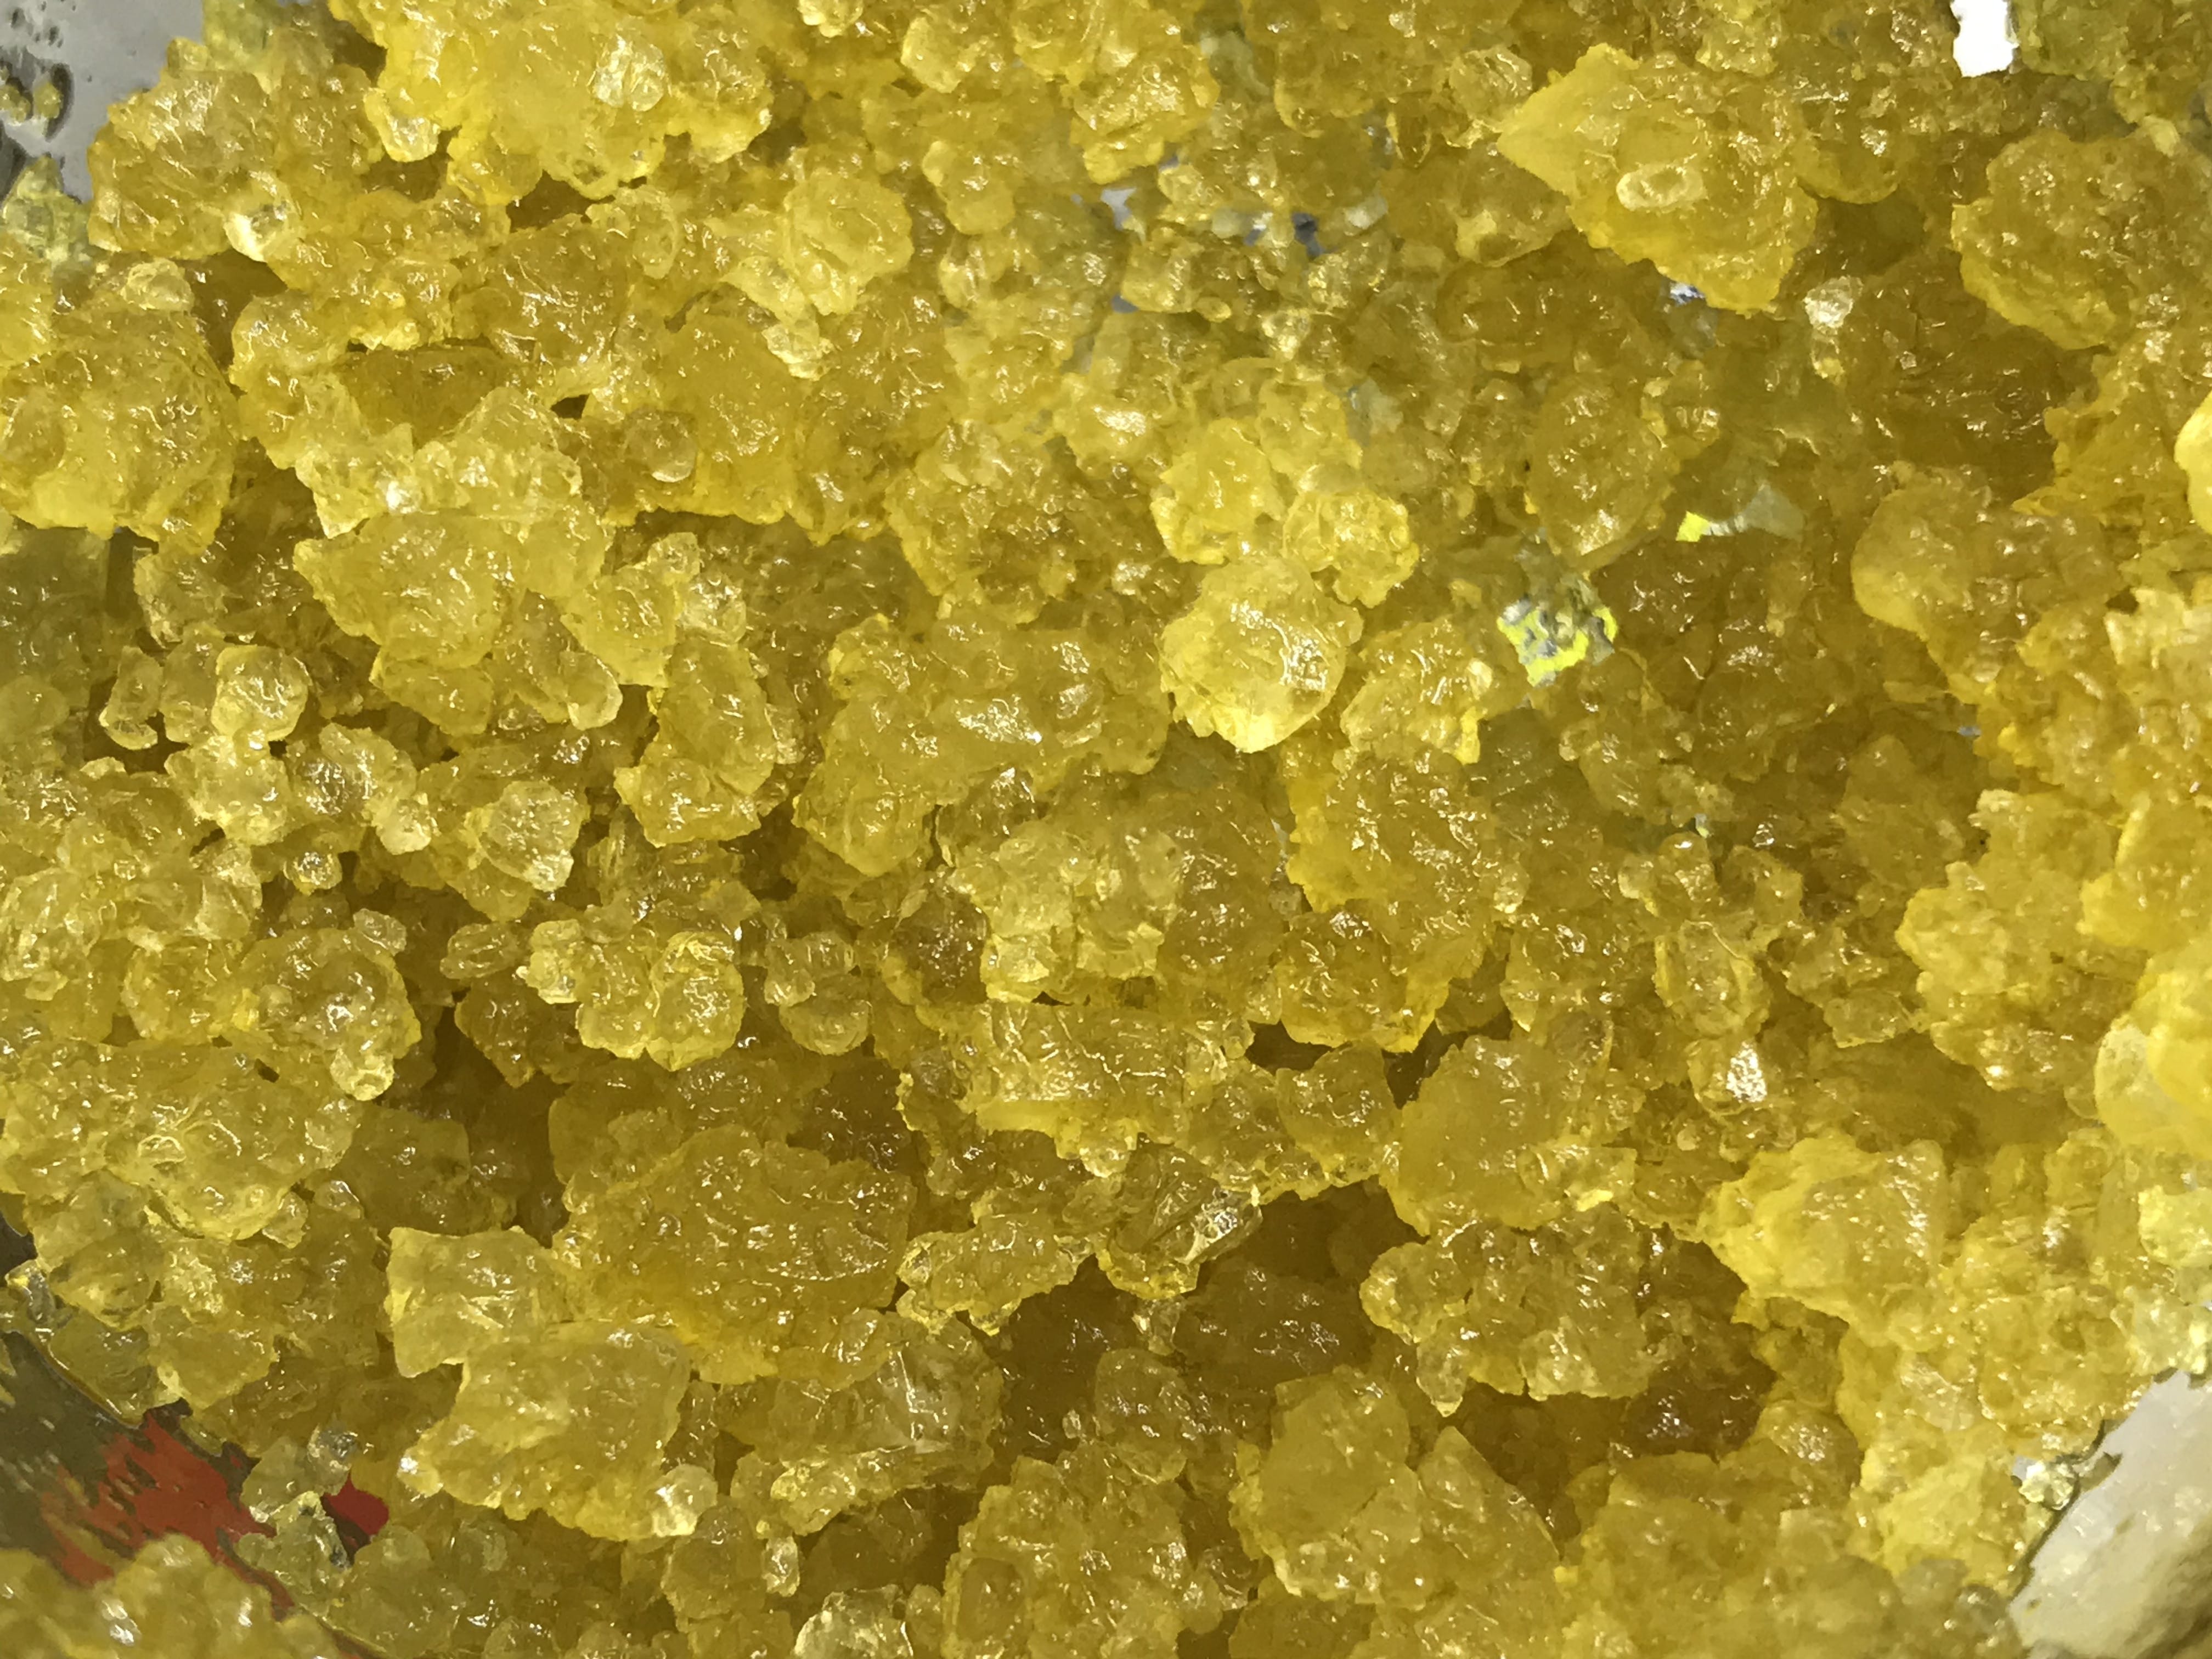 concentrate-sour-diesel-crystalline